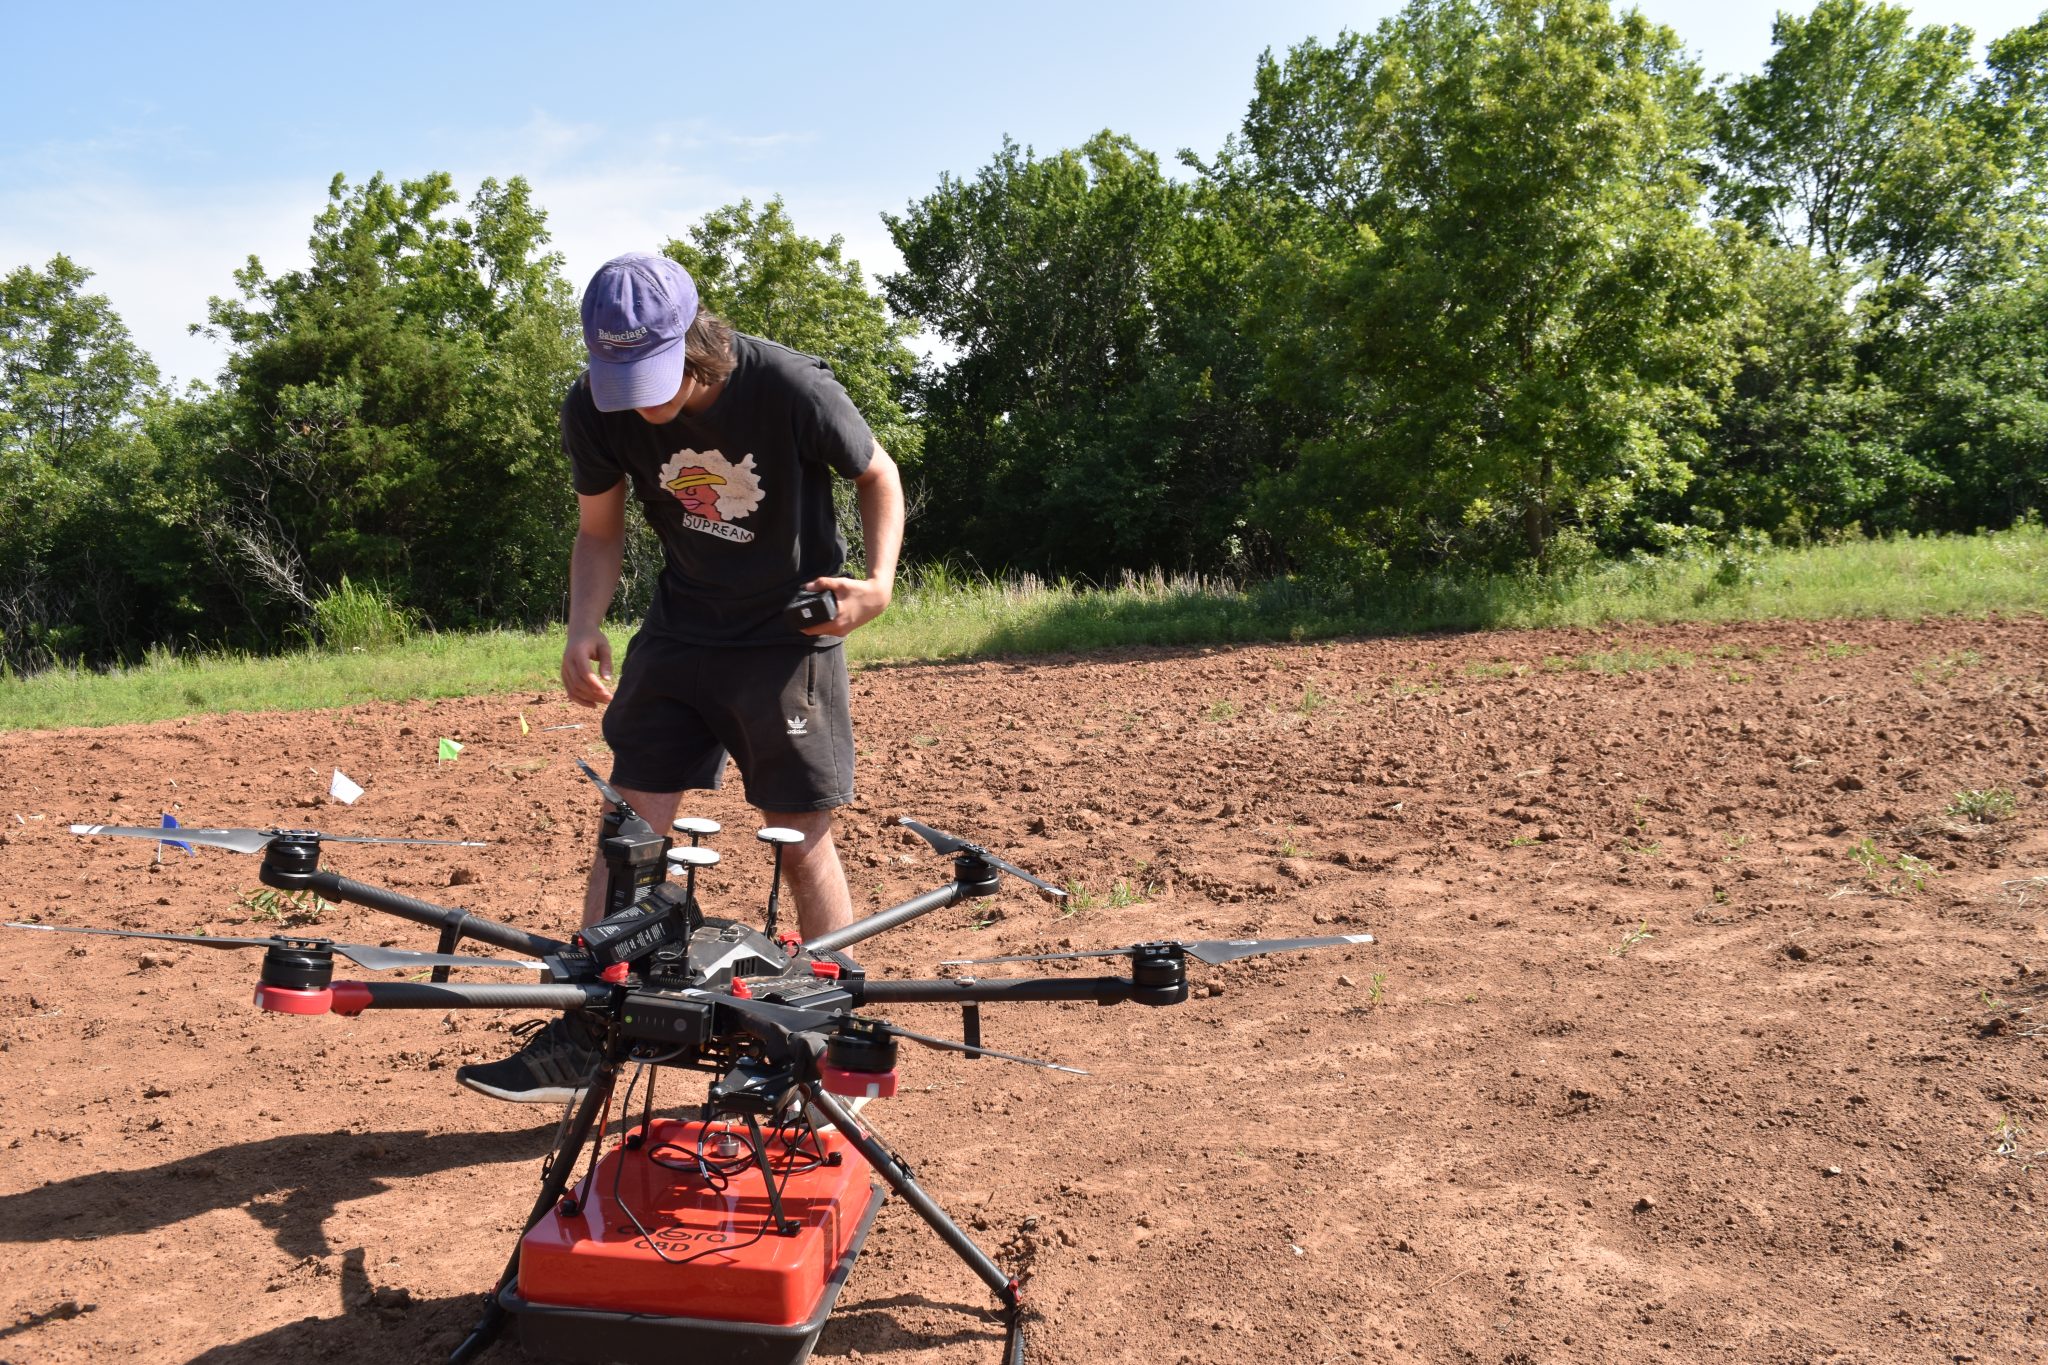 "With Drones, Geophysics and ArtificiaI Intelligence, Researchers Prepare to Do Battle Against Land Mines"